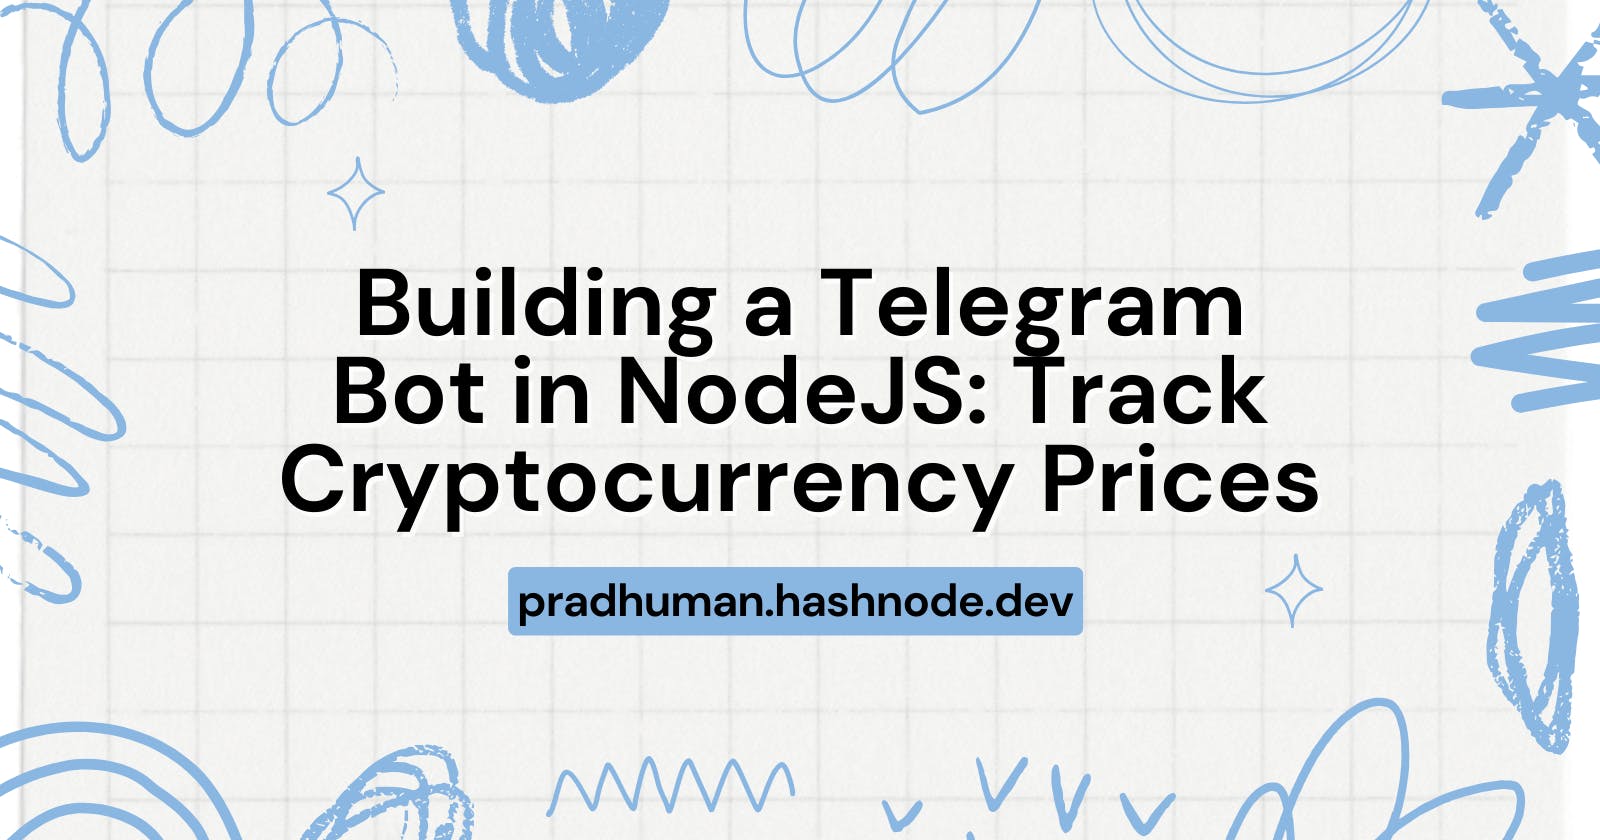 Building a Telegram Bot in NodeJS: Track Cryptocurrency Prices